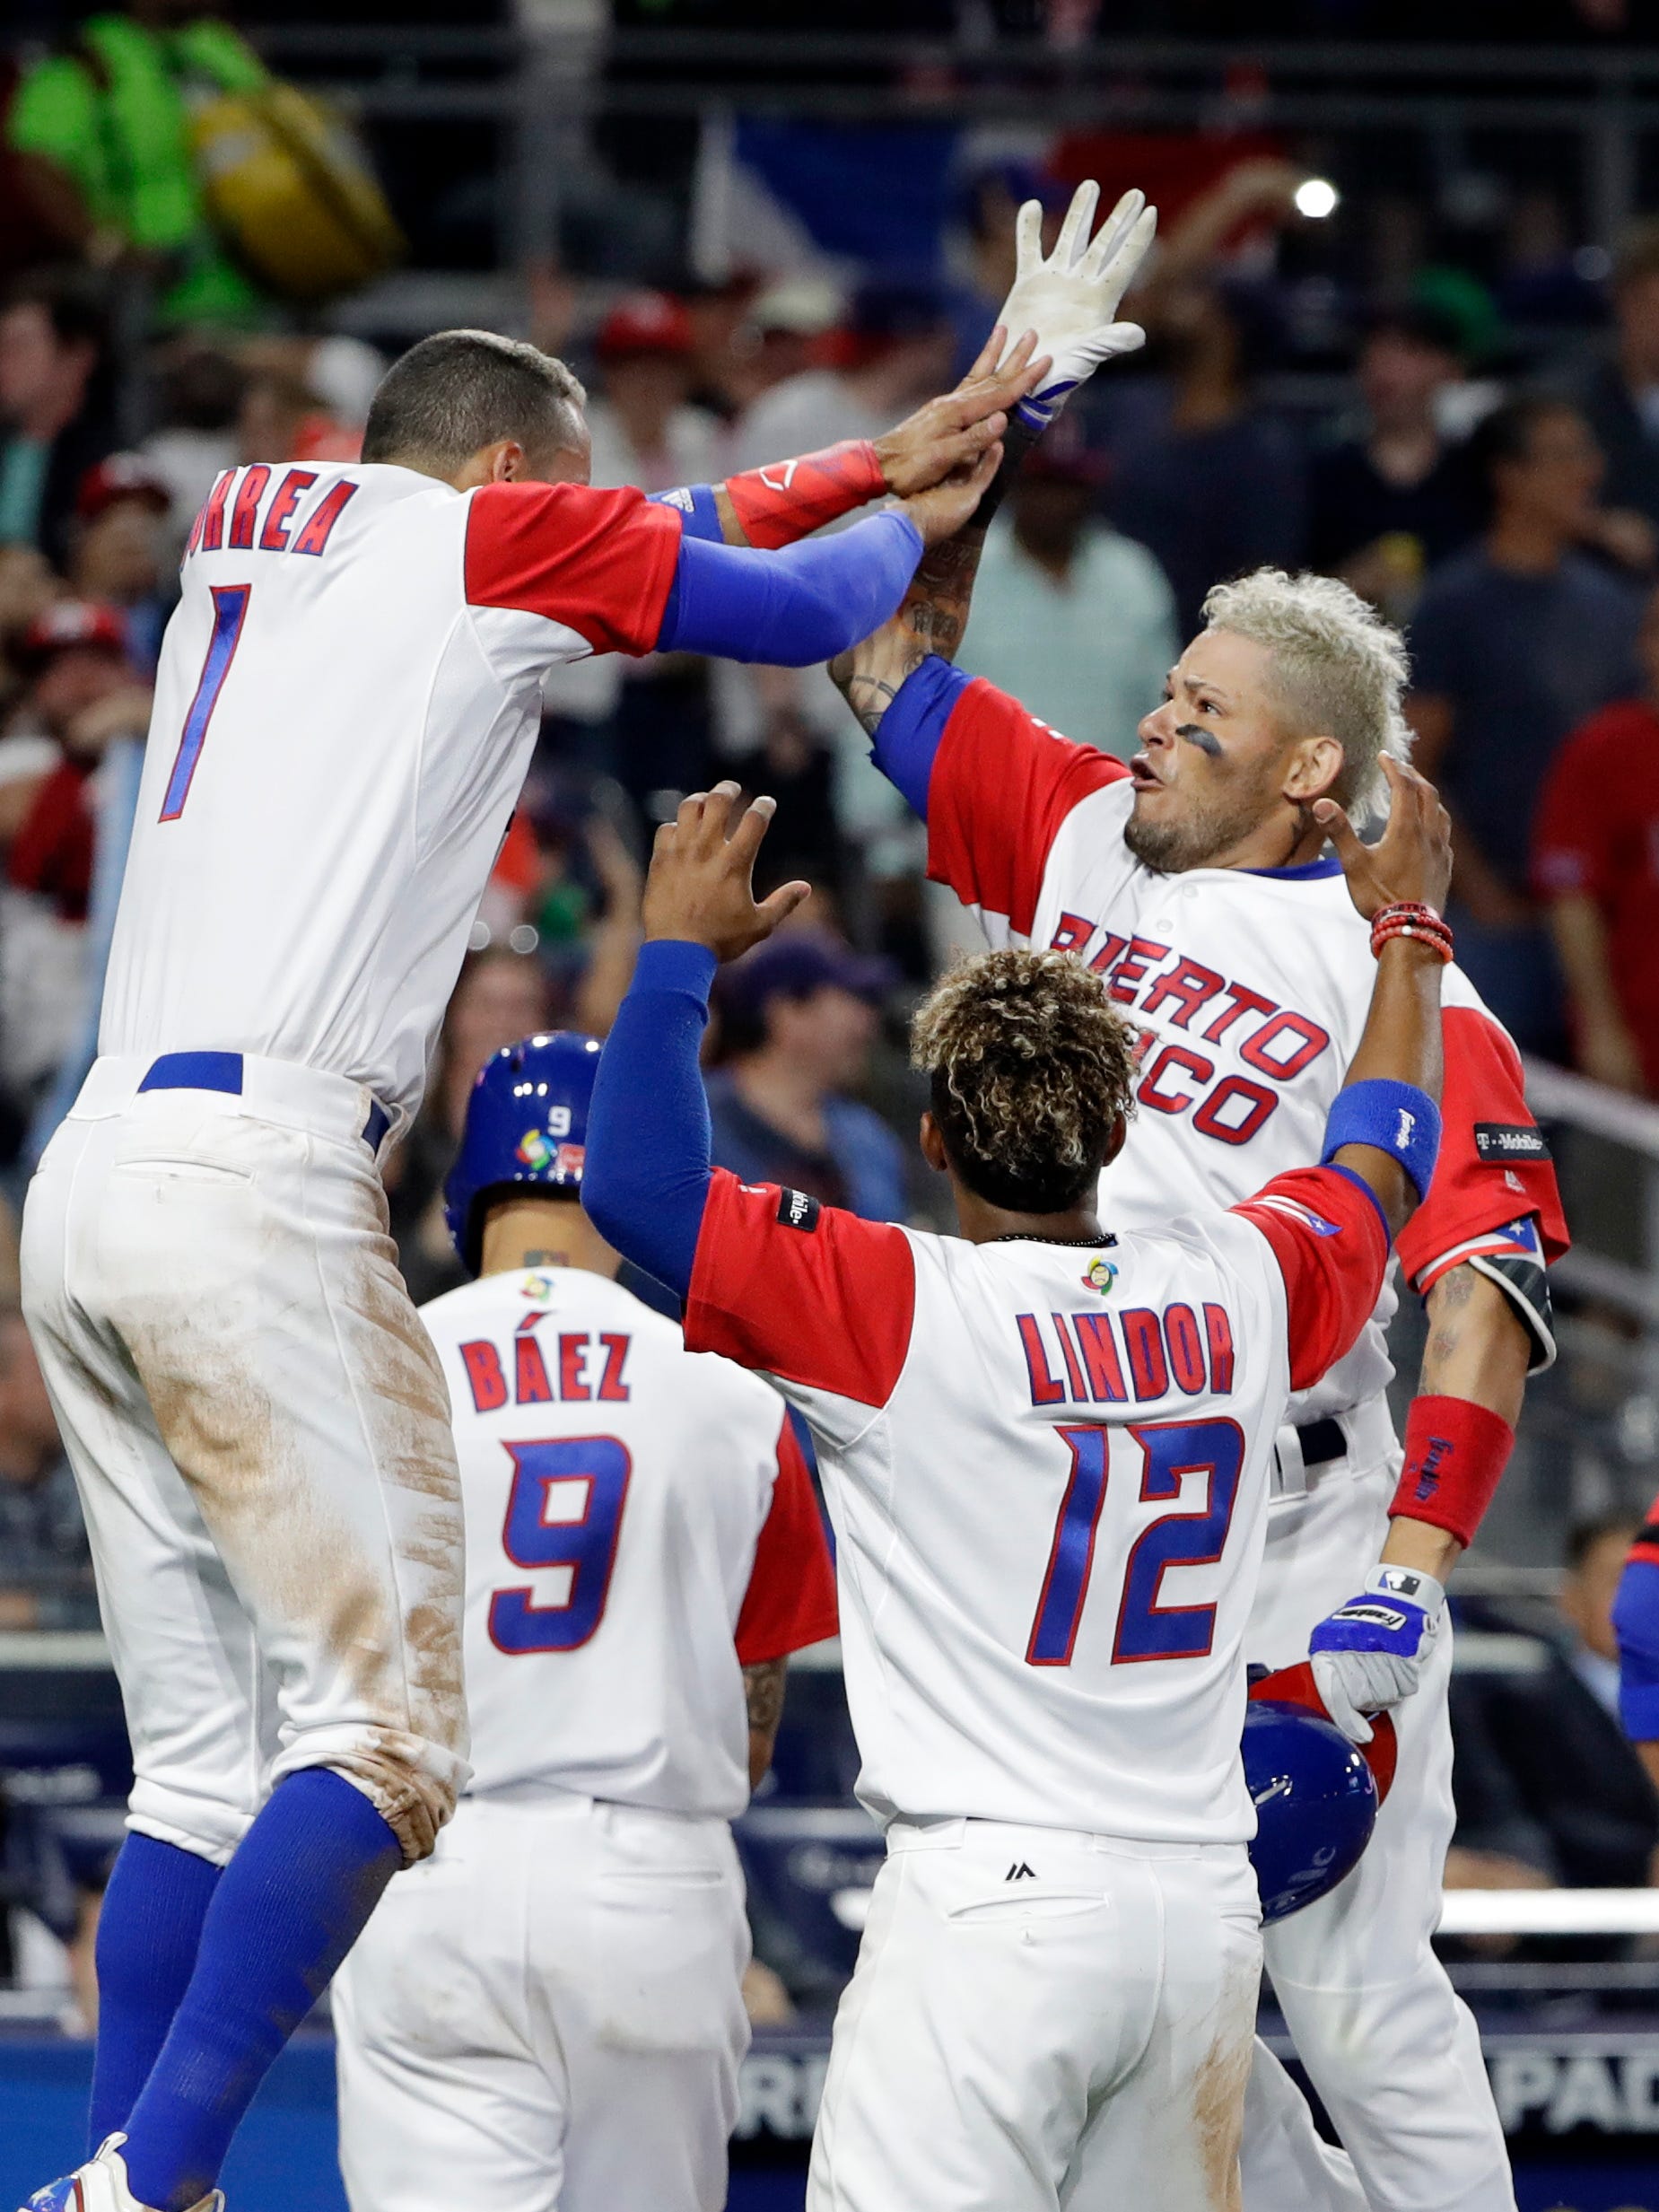 Puerto Rico wins clash with Dominicans at World Baseball Classic